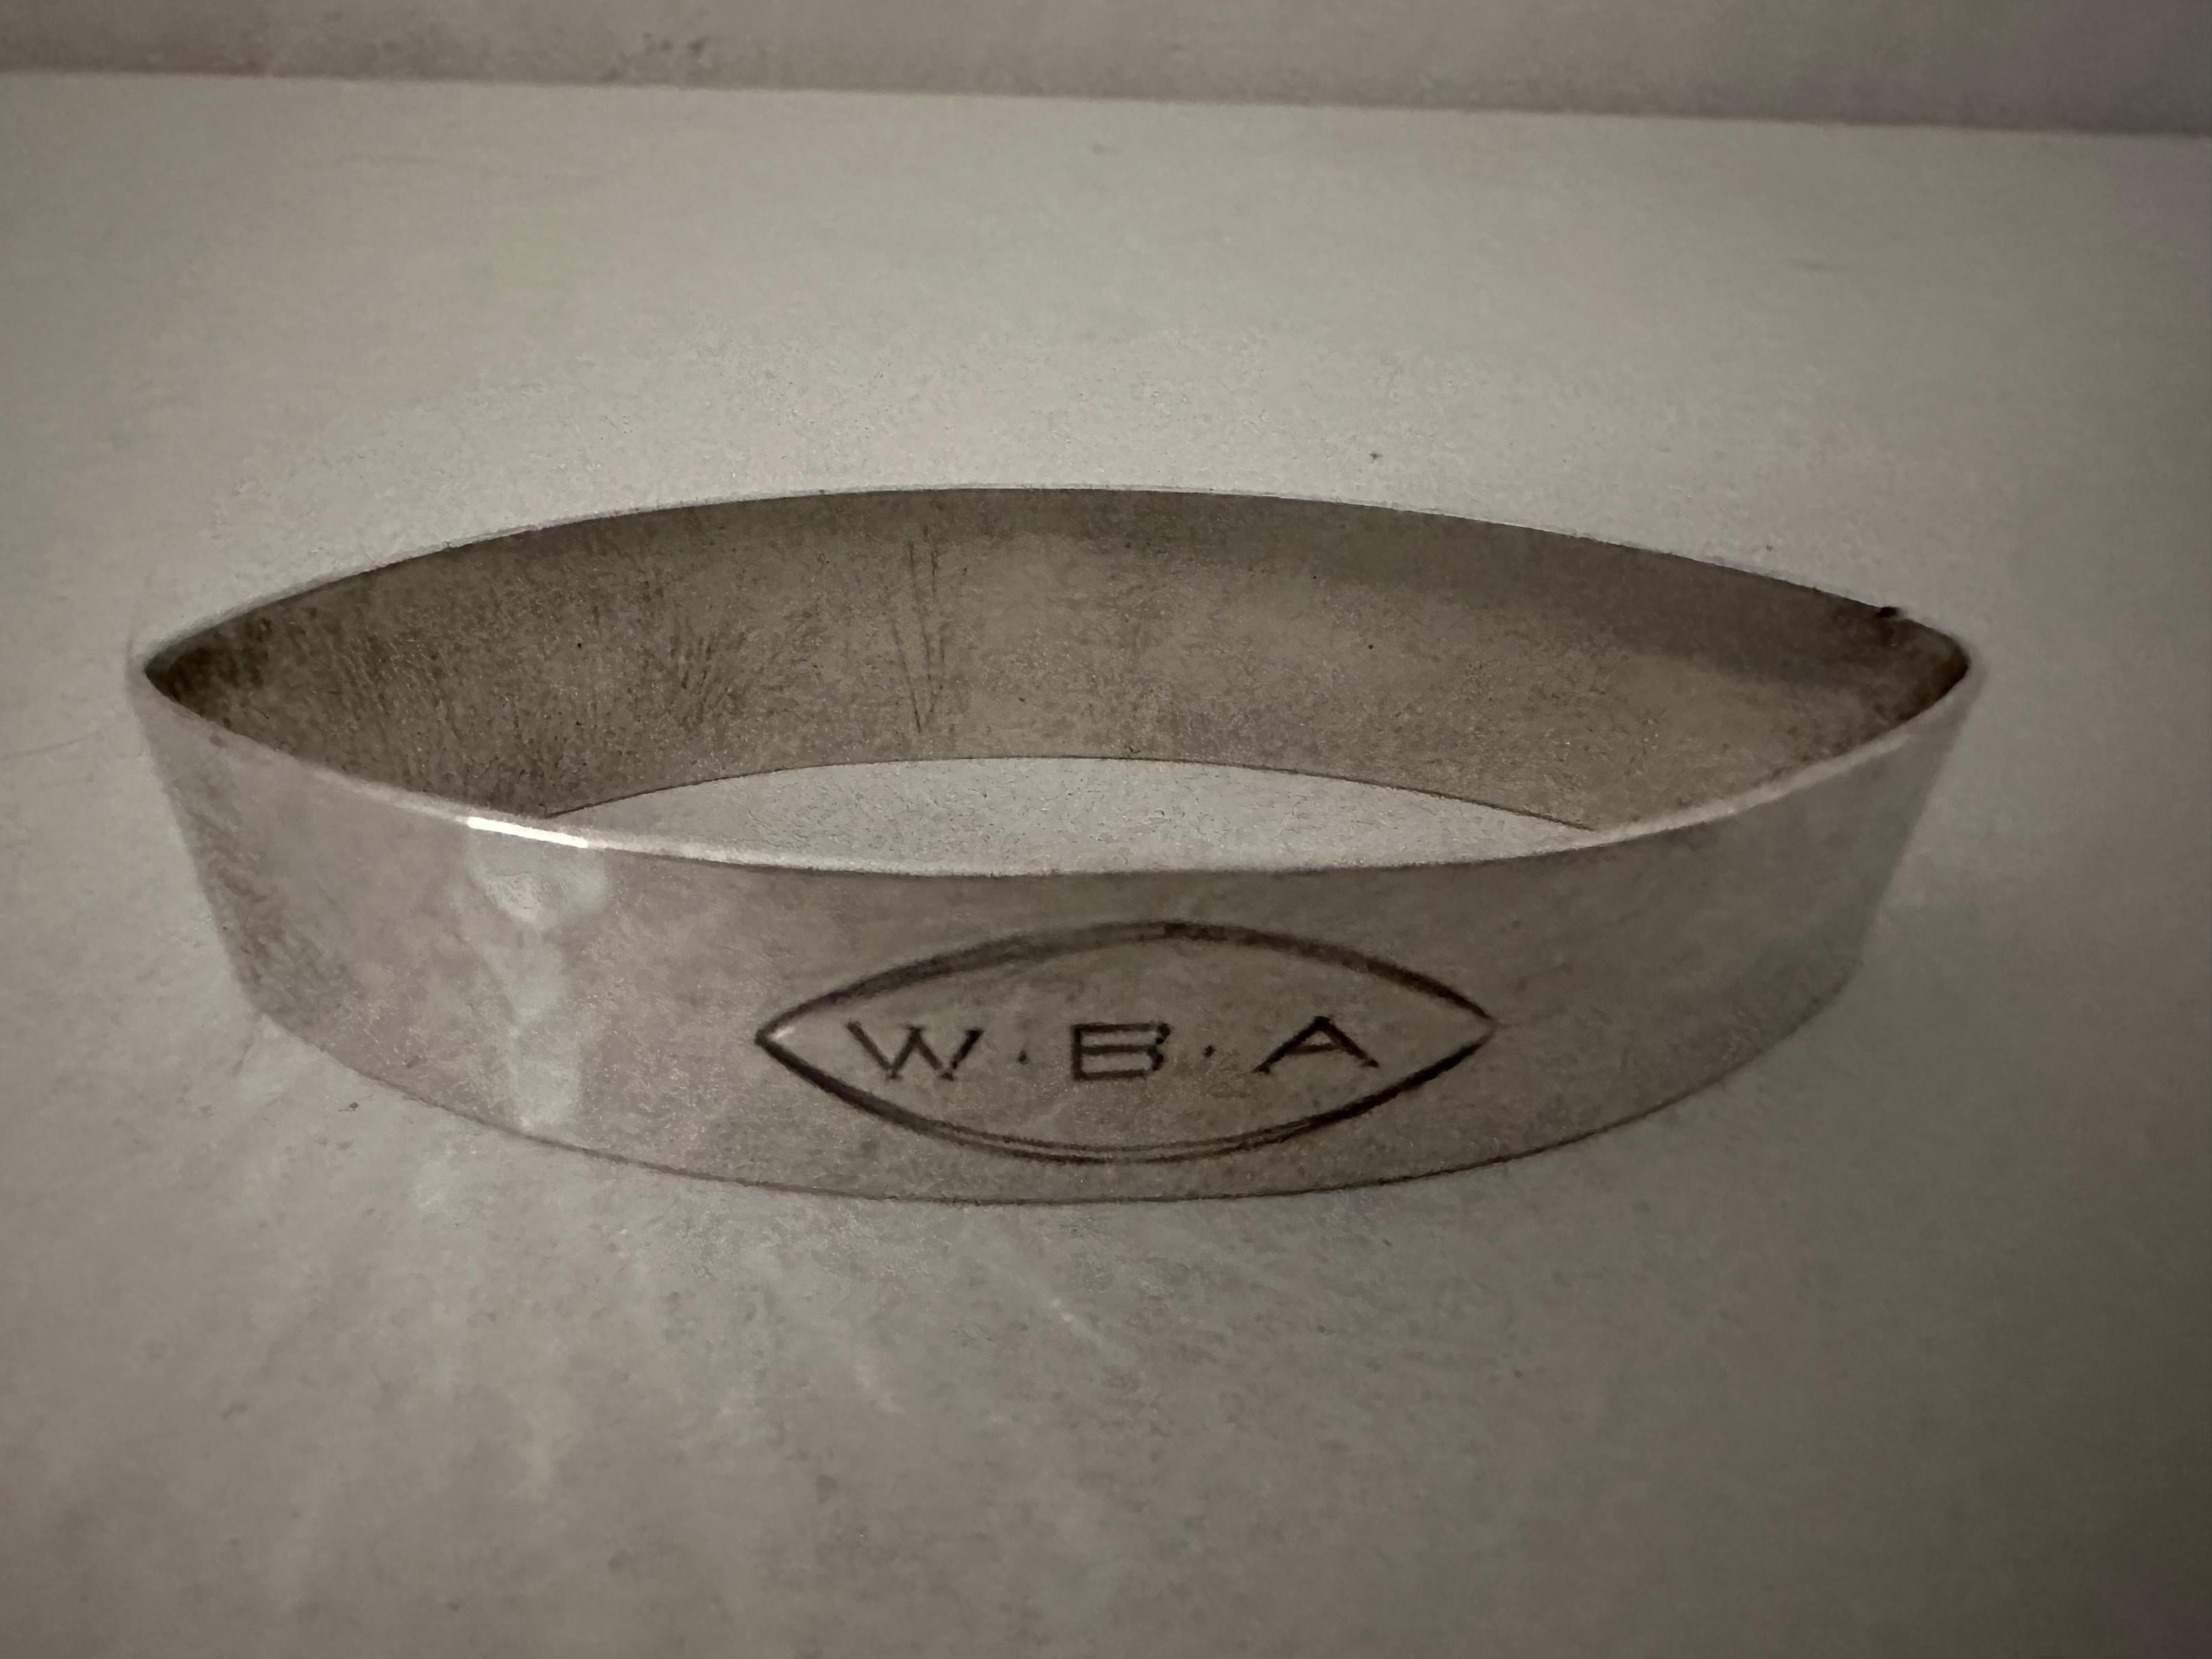 A pointed oval sterling napkin ring with WBA engraved.  Stamped sterling.